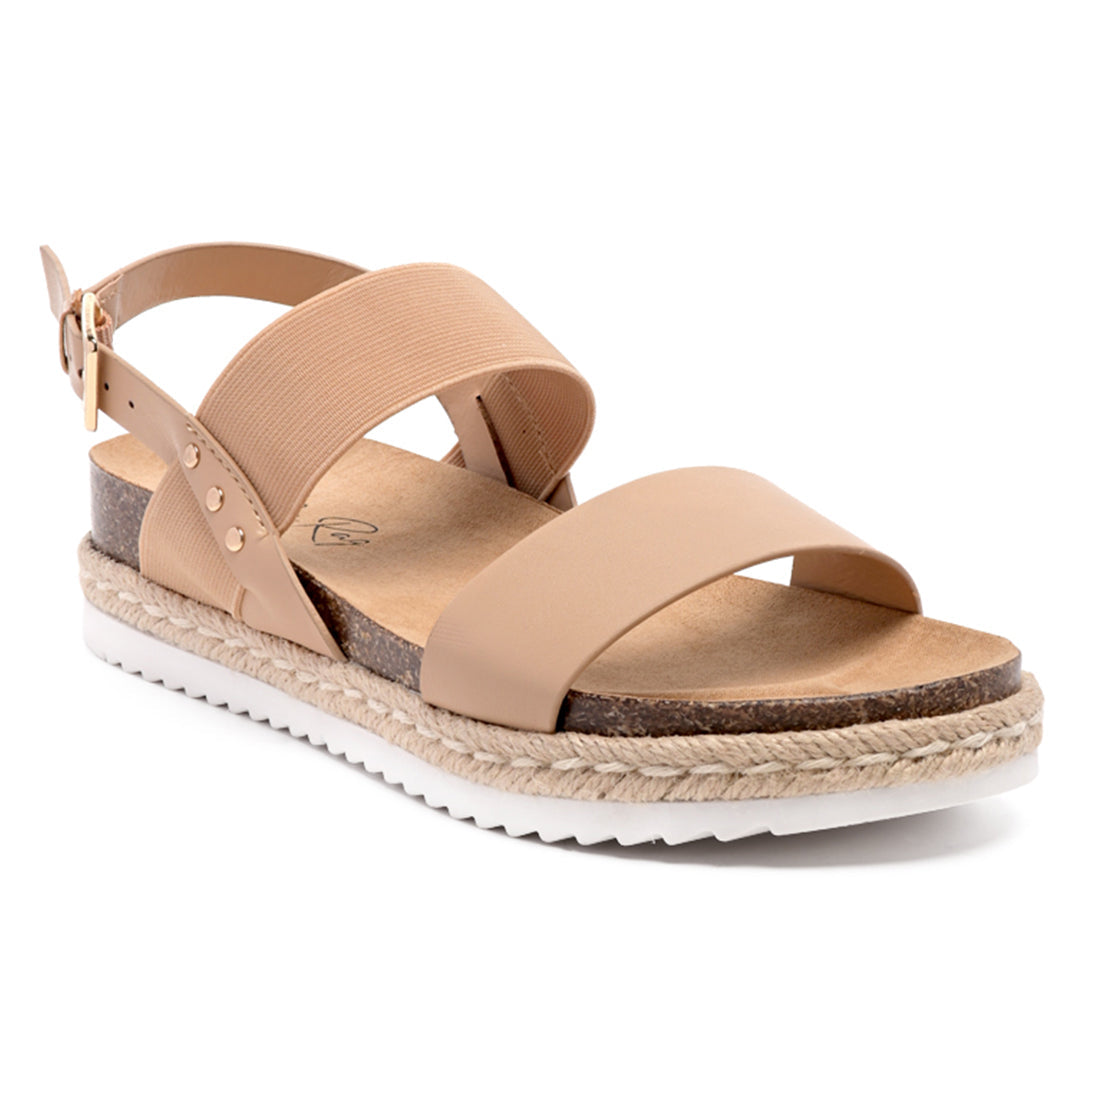 Espadrille Detail Everyday Sandals in Nude - Nude